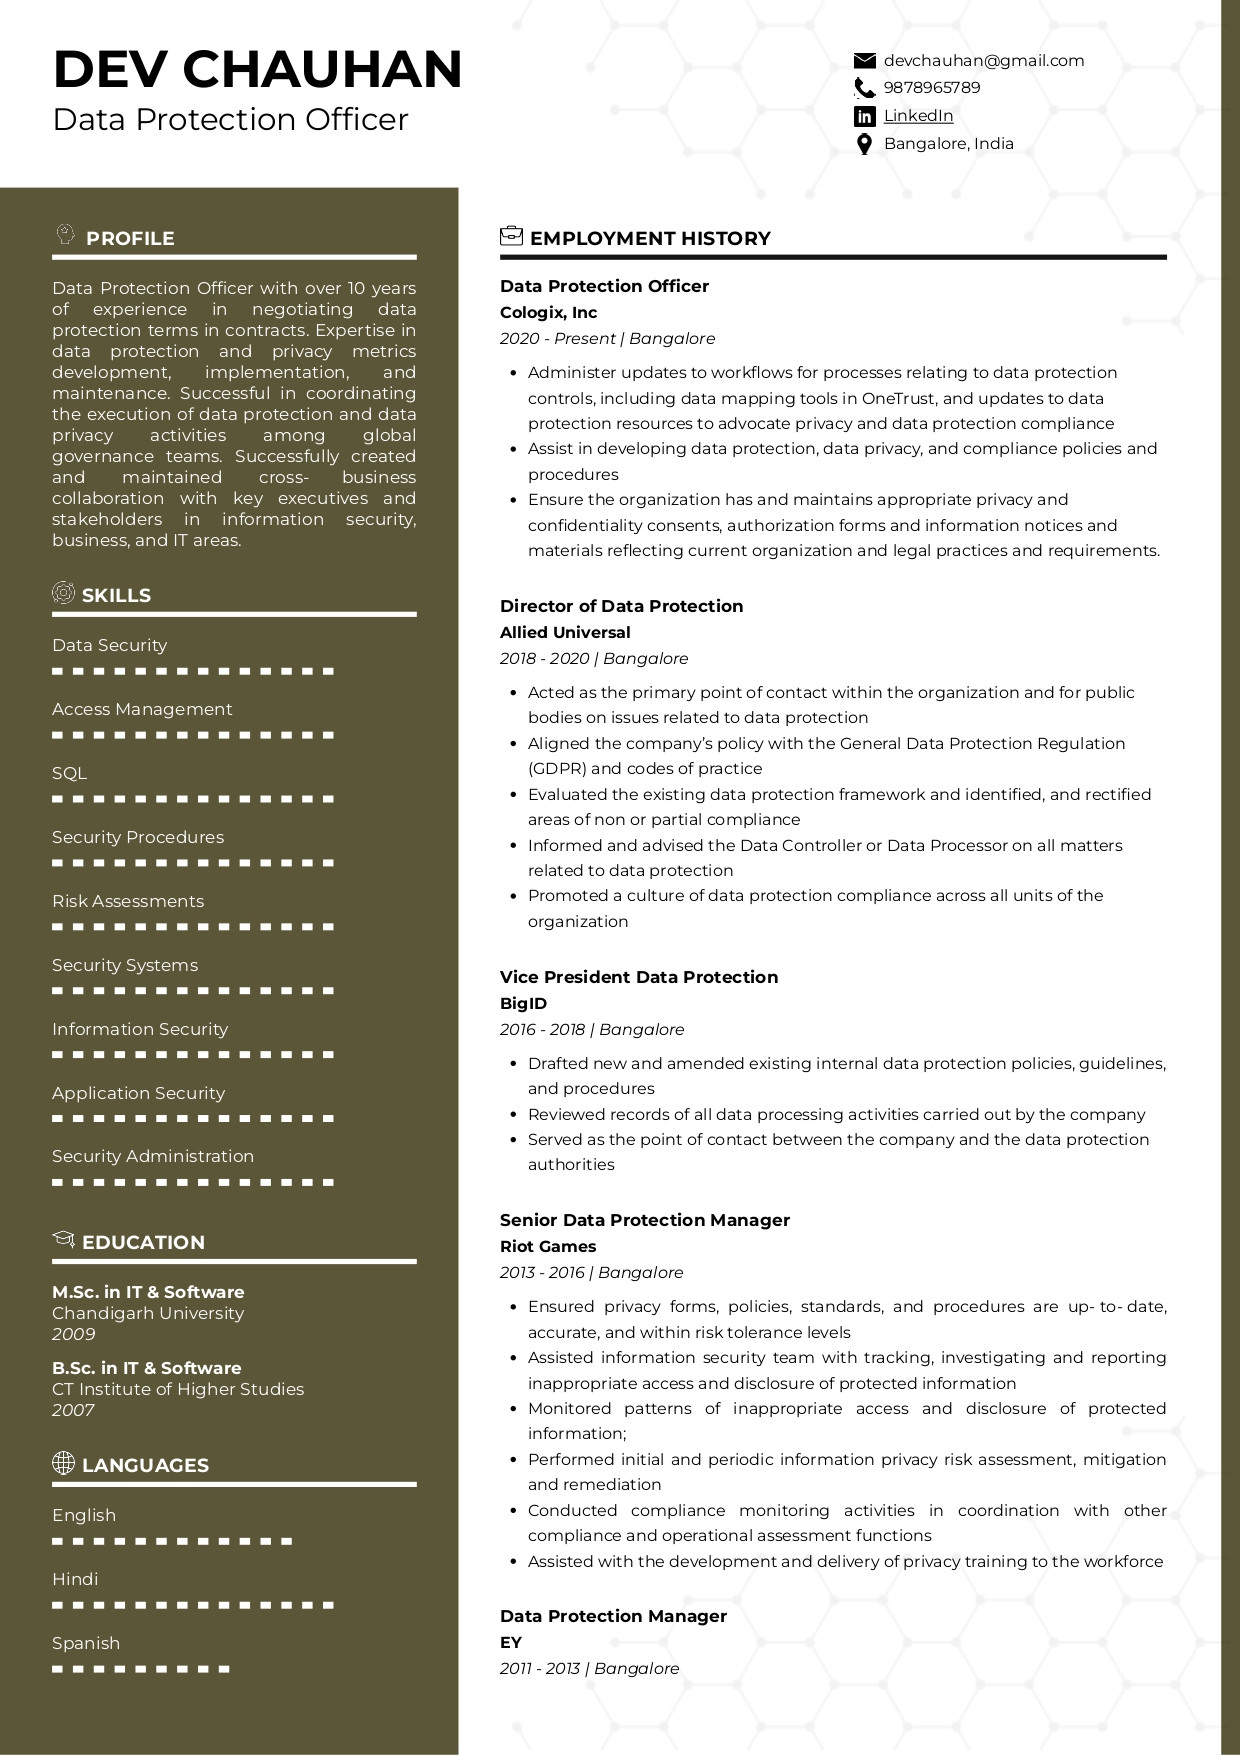 Priviledged Access Management Systems Engineer Sample Resume Sample Resume Of Data Protection Officer with Template & Writing …